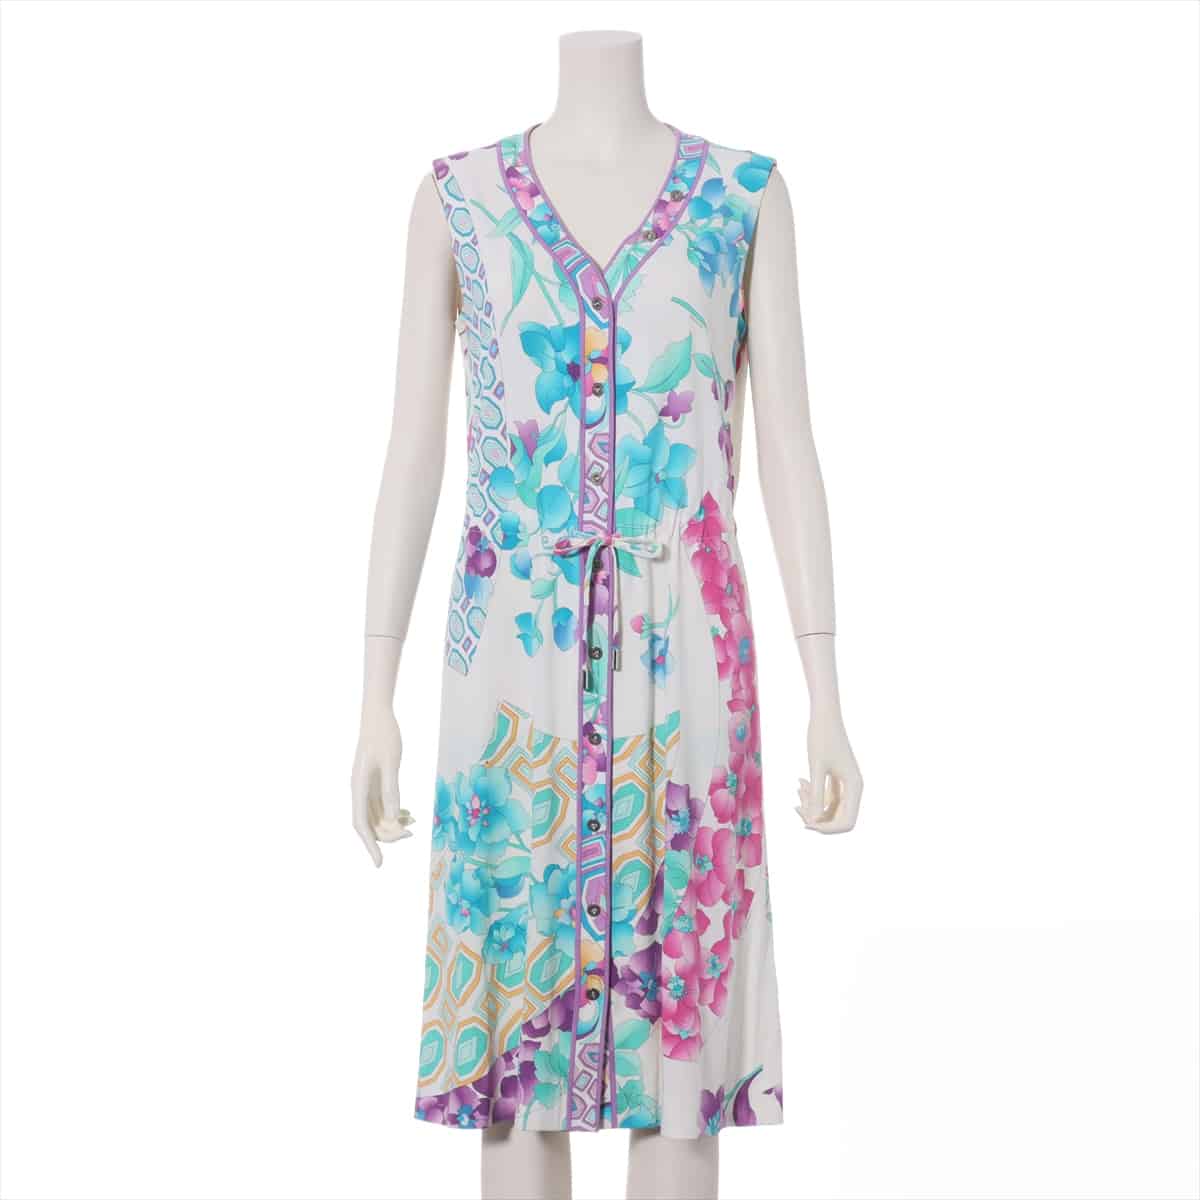 LEONARD Cotton Sleeveless dress 40 Ladies' Multicolor  There are spots and yellowing throughout